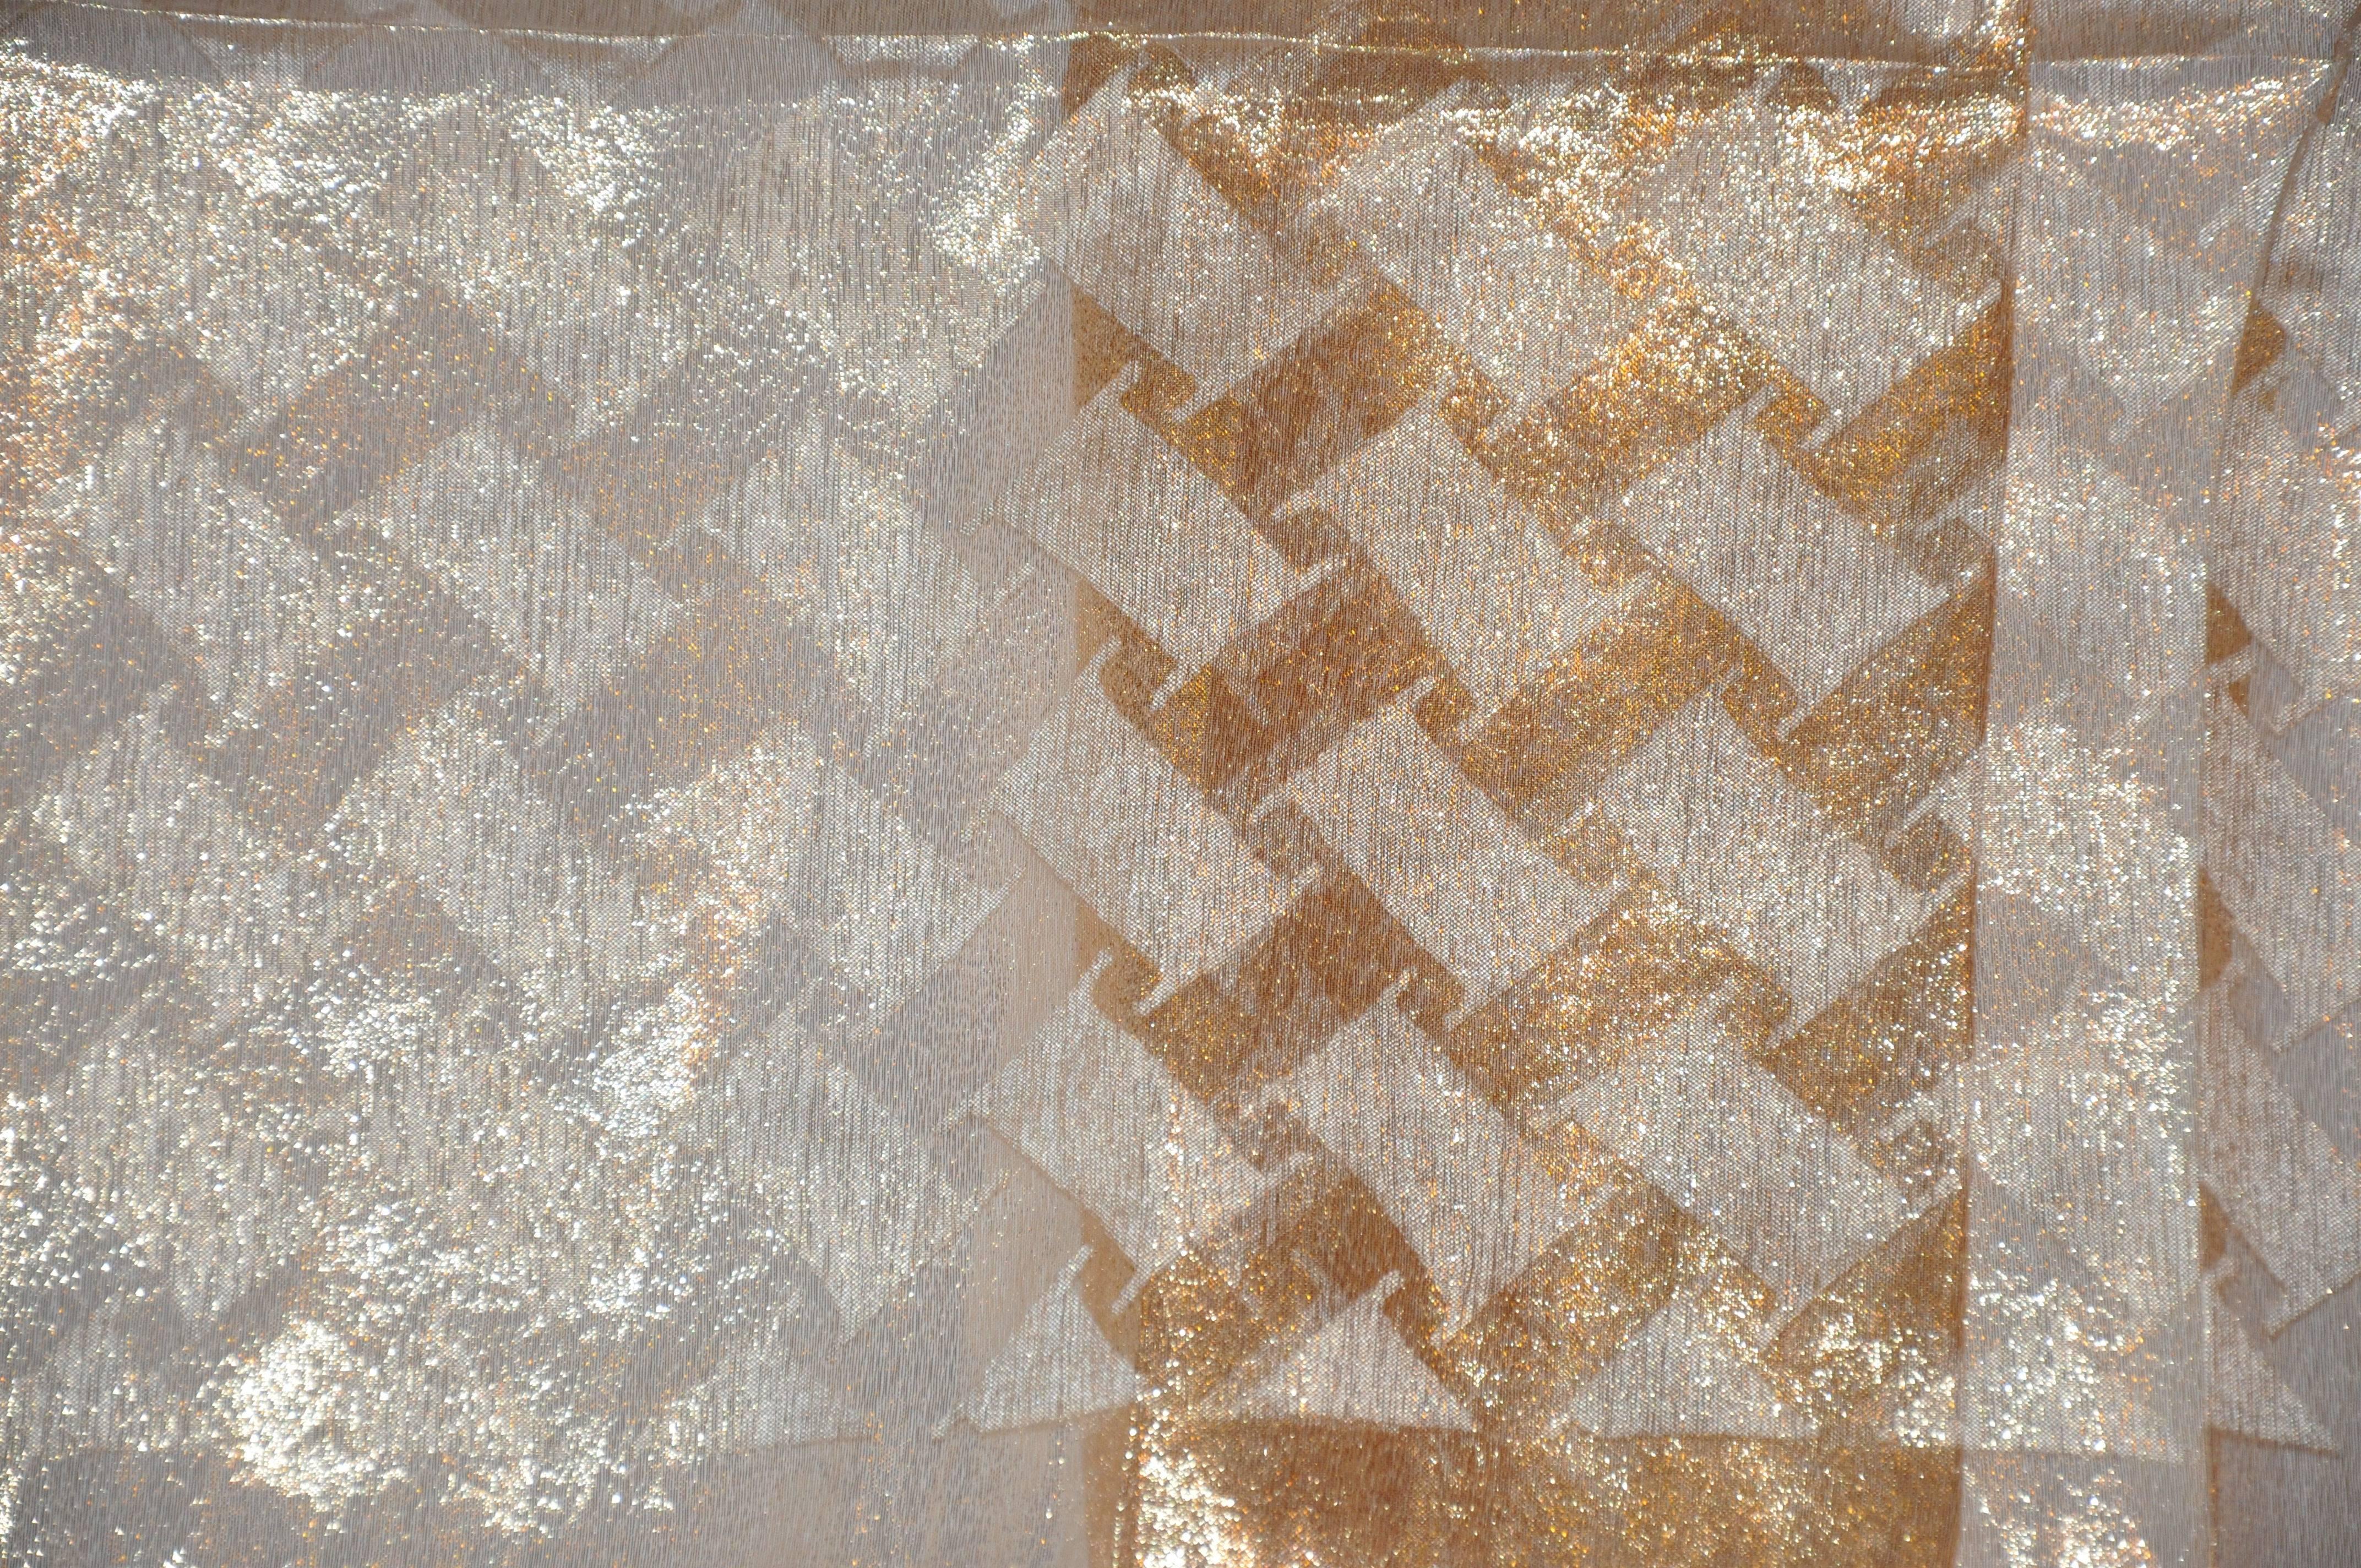 Rare gold & white metallic lame accented with a gold lame border rectangle scarf measures 17" x 46". Made in Japan.